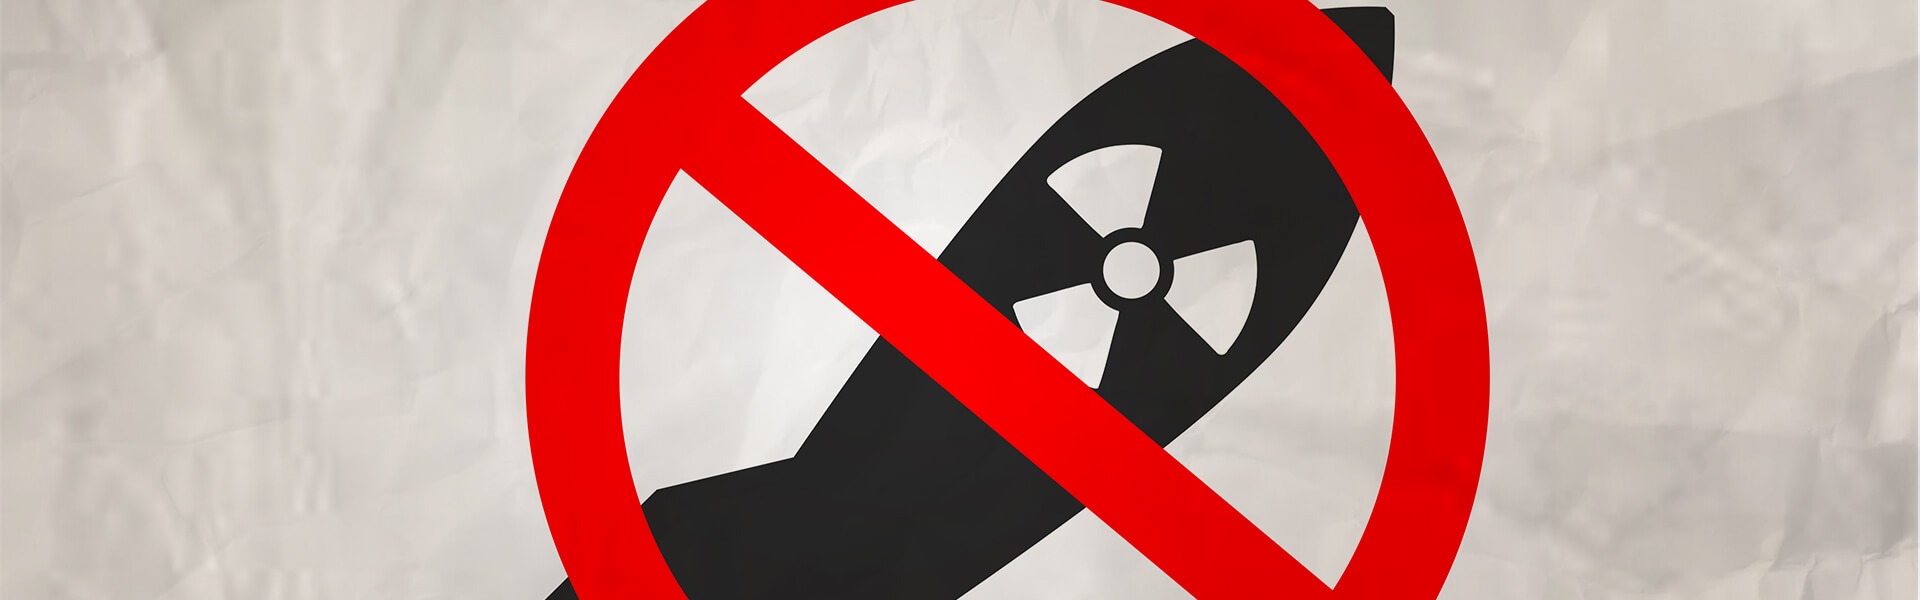 Banning Nuclear Weapons: Mission Incomplete